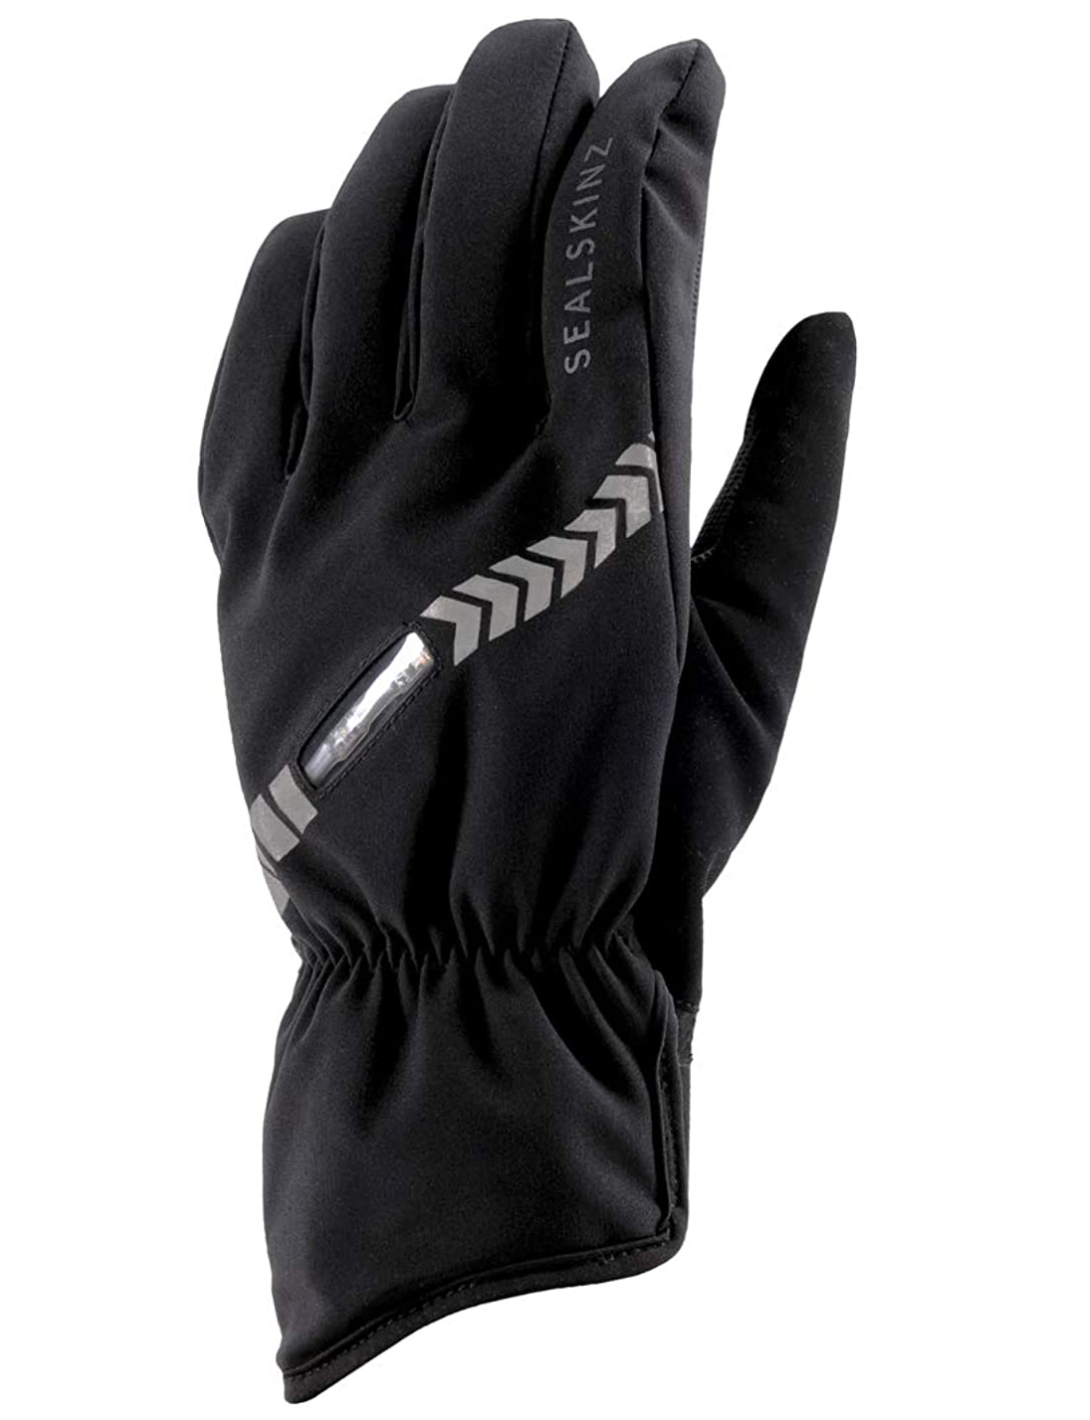 Halford Cycle mitts gloves  size small unisex new